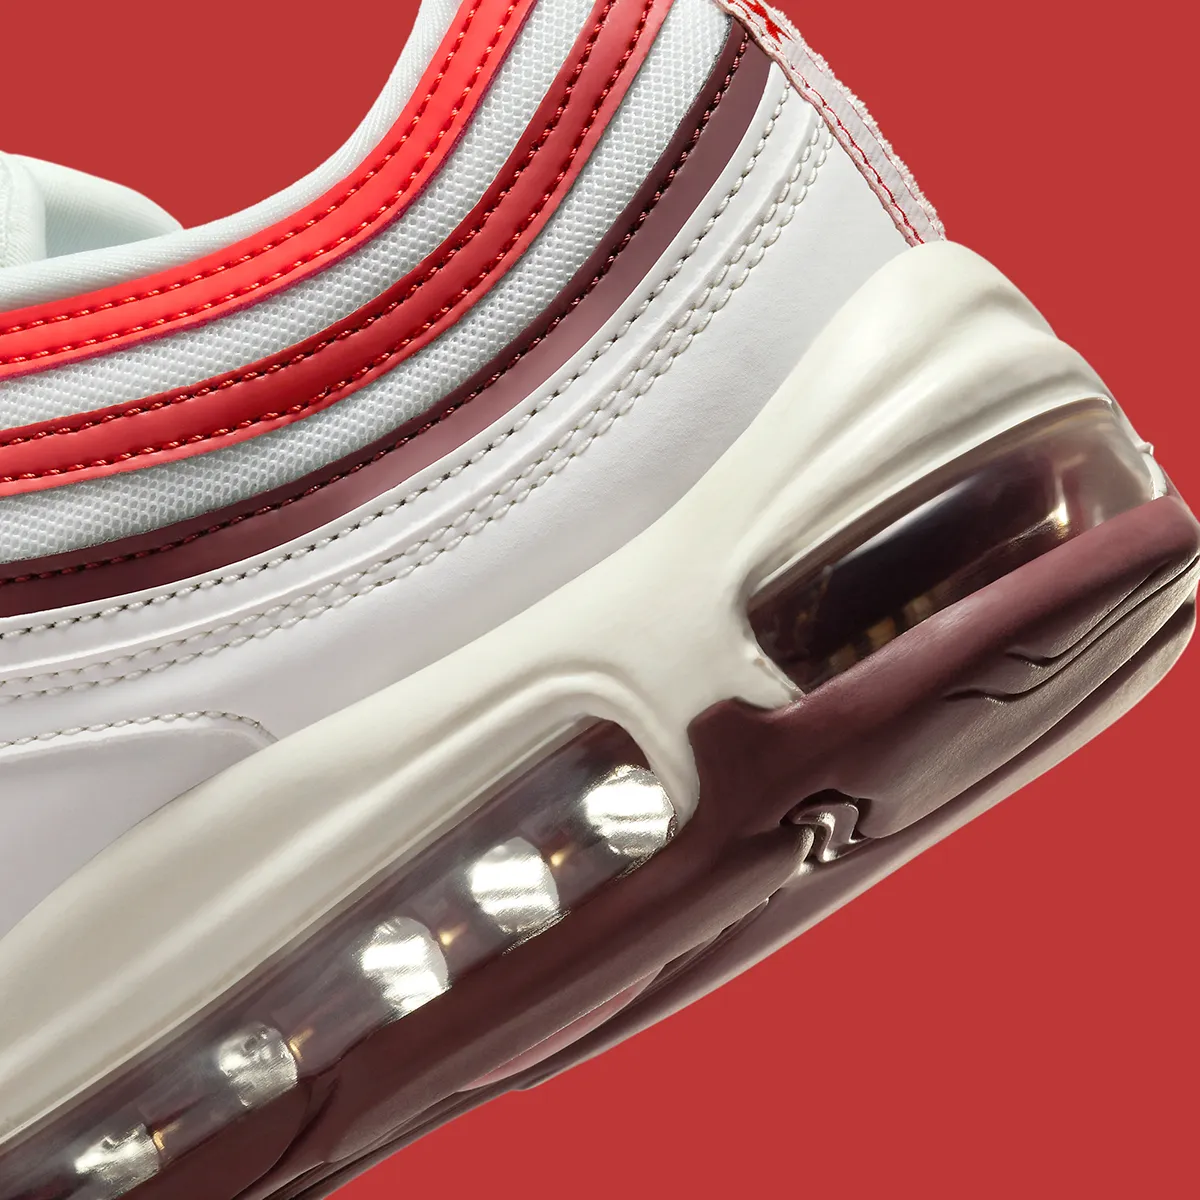 nike-air-max-97-white-dune-red-fn6957-101-2